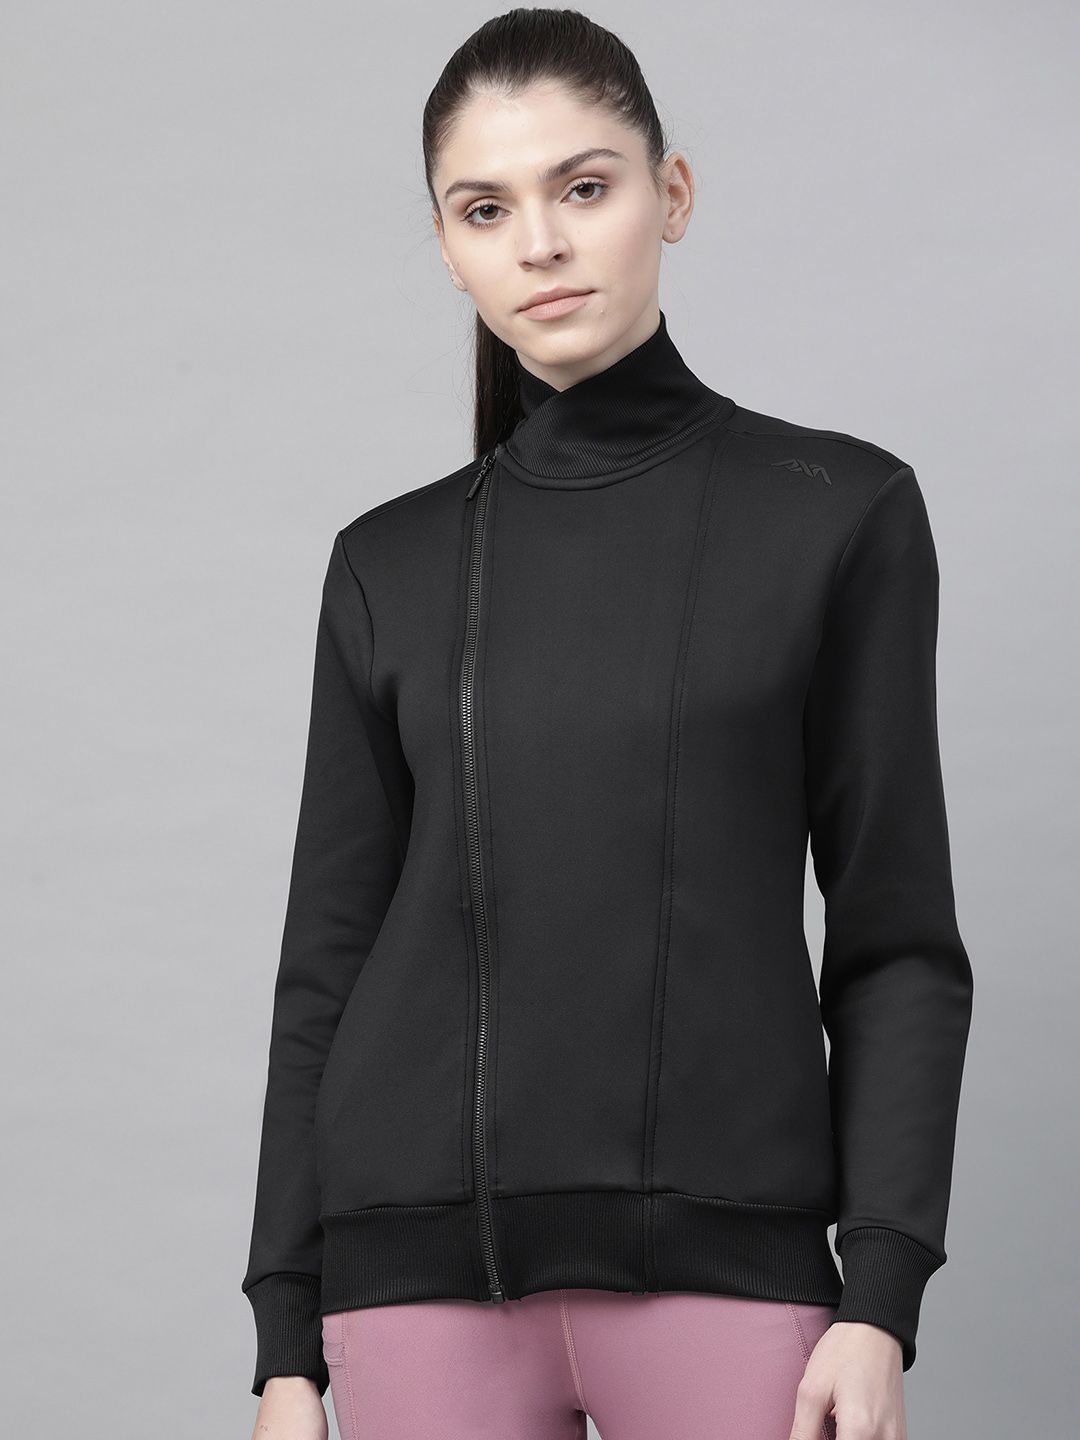 Alcis Nari Women Black Solid Lightweight Sporty Jacket Price in India